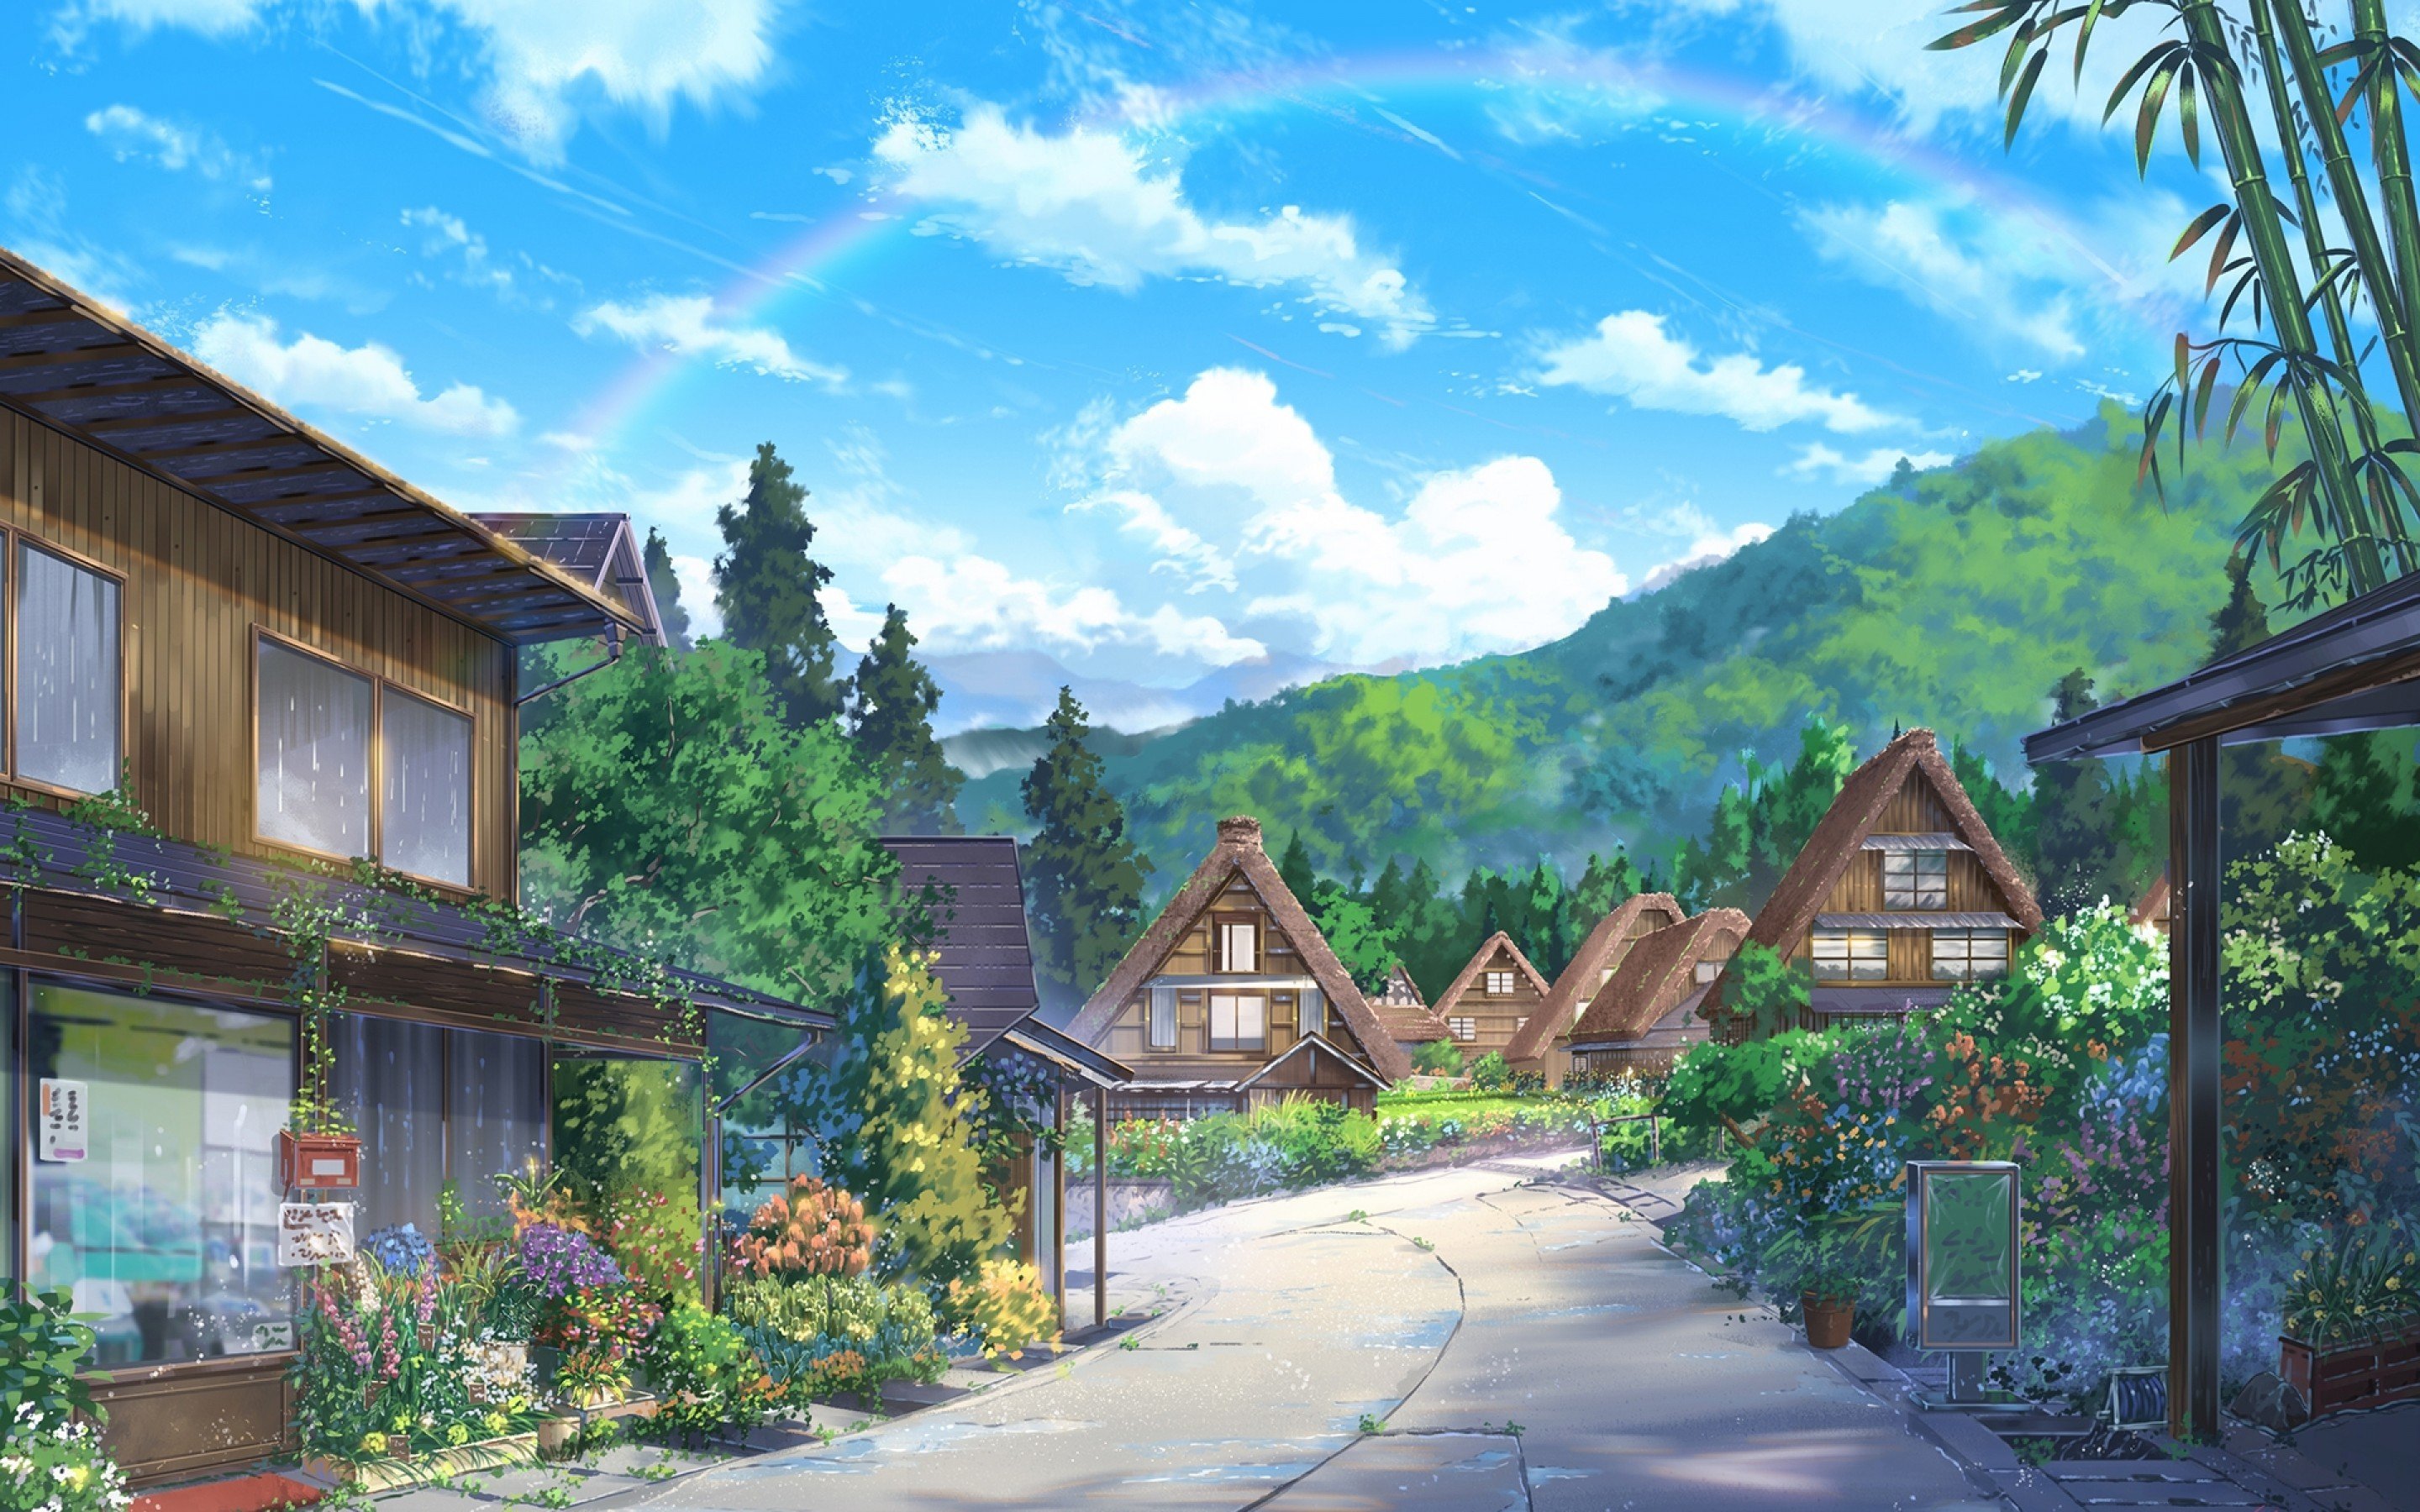 Download 2880x1800 Anime Landscape, Houses, Scenic, Clouds, Nature Wallpaper for MacBook Pro 15 inch